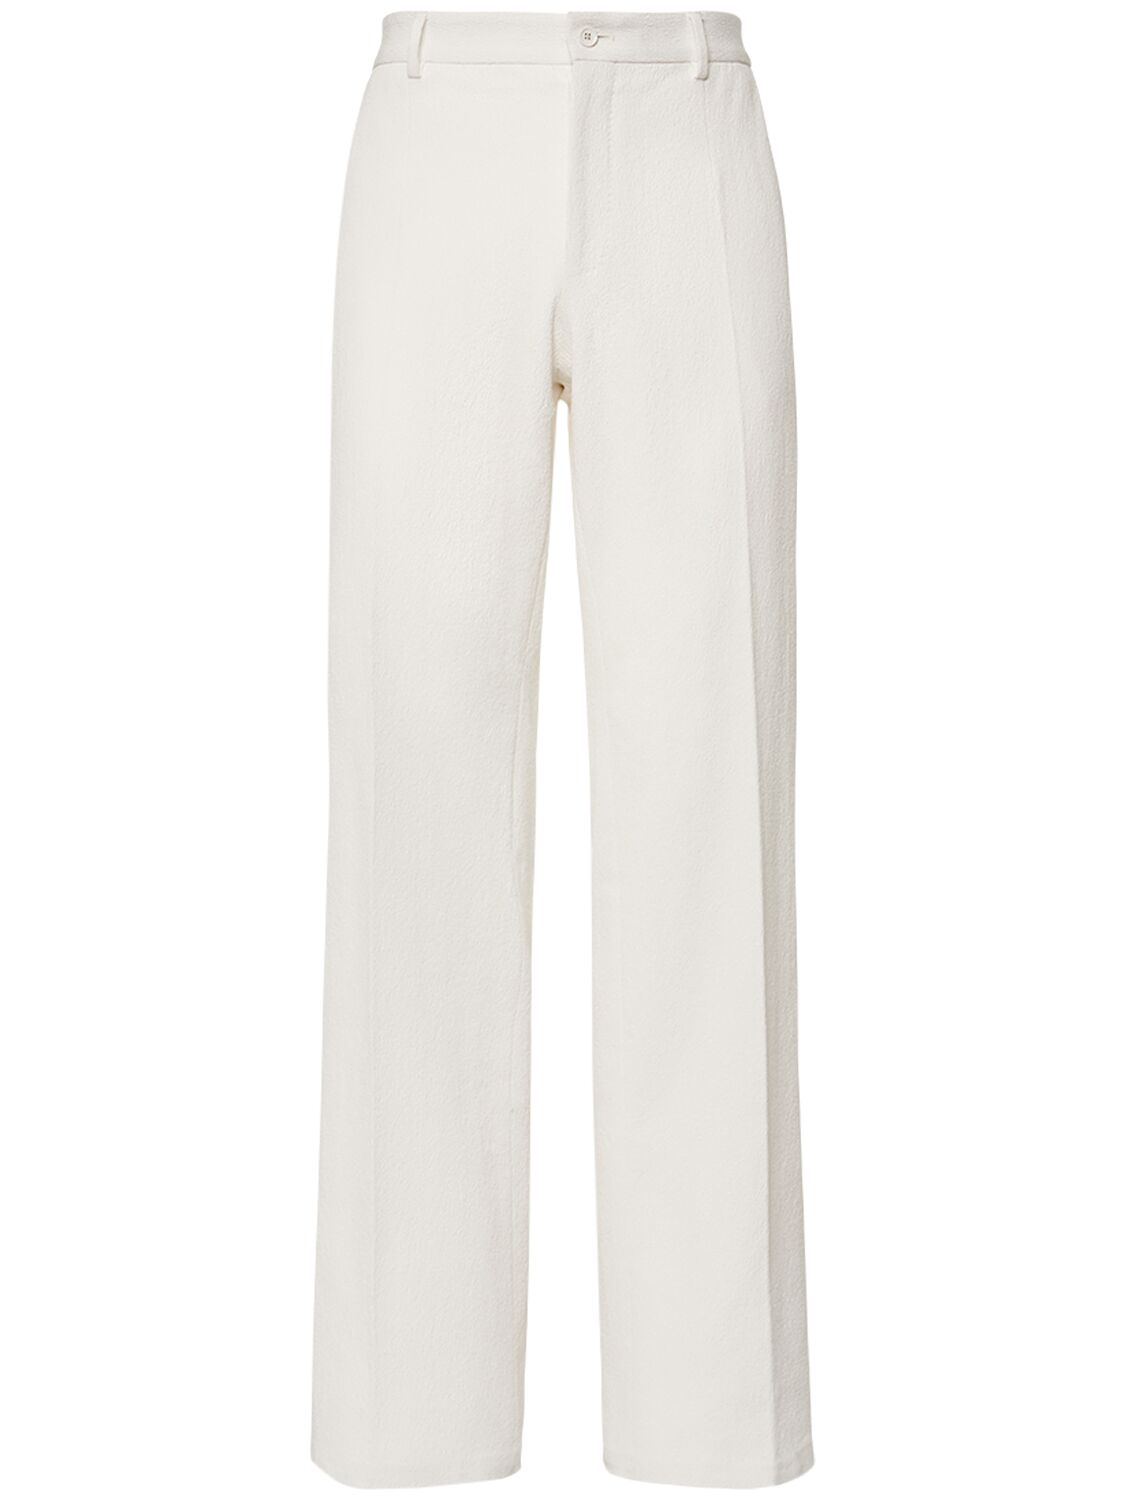 Image of Cotton Blend Straight Pants